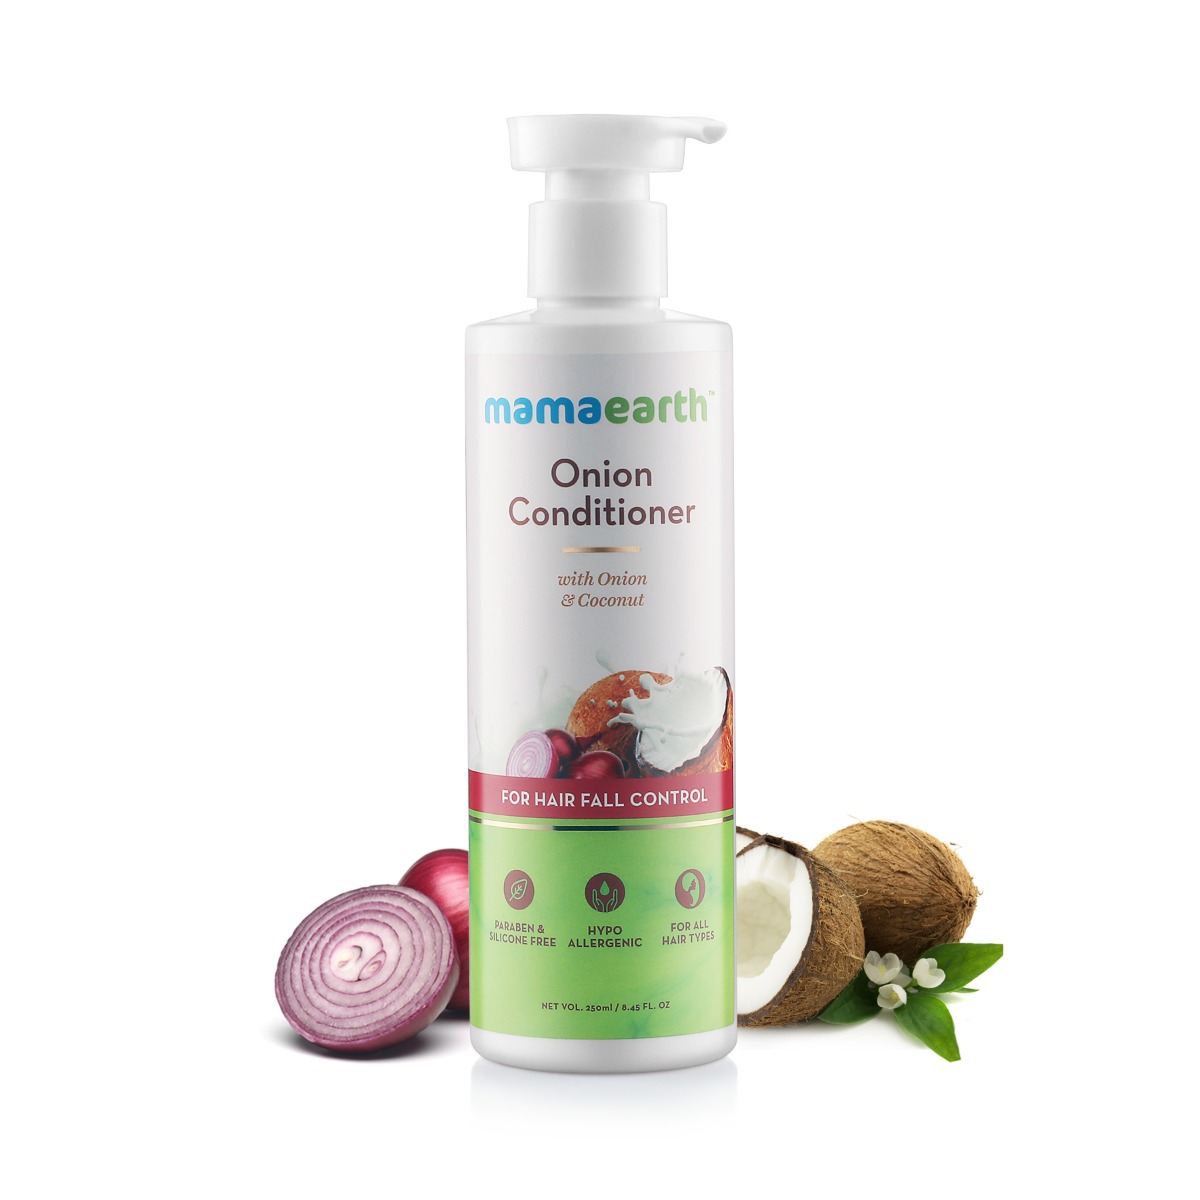 MamaEarth Onion Conditioner for Hair Growth